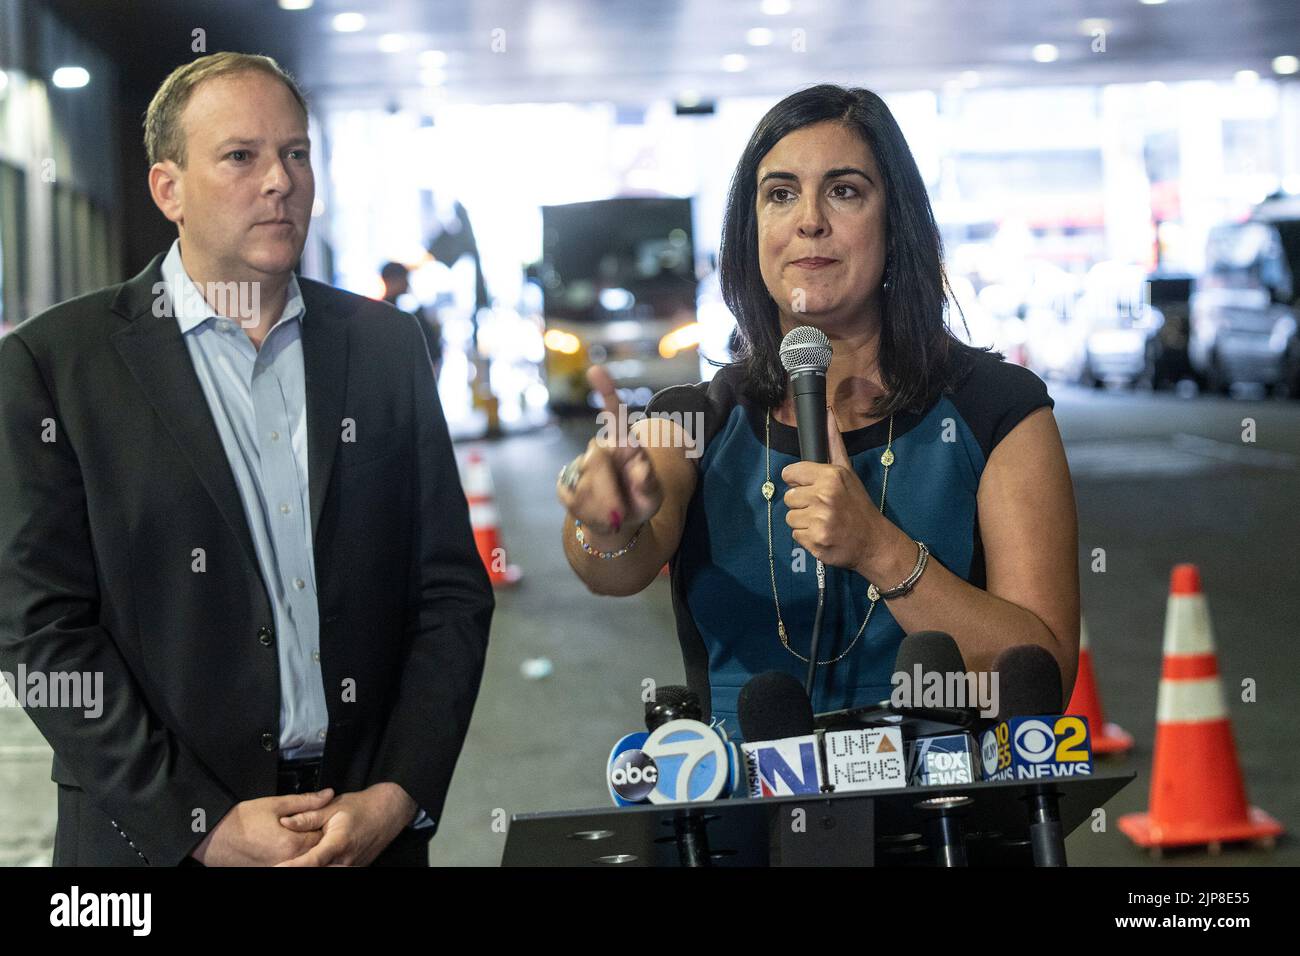 New York, United States. 15th Aug, 2022. U. S. Representative Nicole Malliotakis speaks during a joint press conference with U. S. Representative Lee Zeldin at Port Authority Bus Terminal. They discussed the influx of illegal migrants into New York driven by buses from Texas at the order of Texas Governor Greg Abbott. Both lawmakers call on New York Governor Kathy Hochul to do her part to stop the influx of migrants into New York City and demand President Joe Biden secure the Southern Border. (Photo by Lev Radin/Pacific Press) Credit: Pacific Press Media Production Corp./Alamy Live News Stock Photo